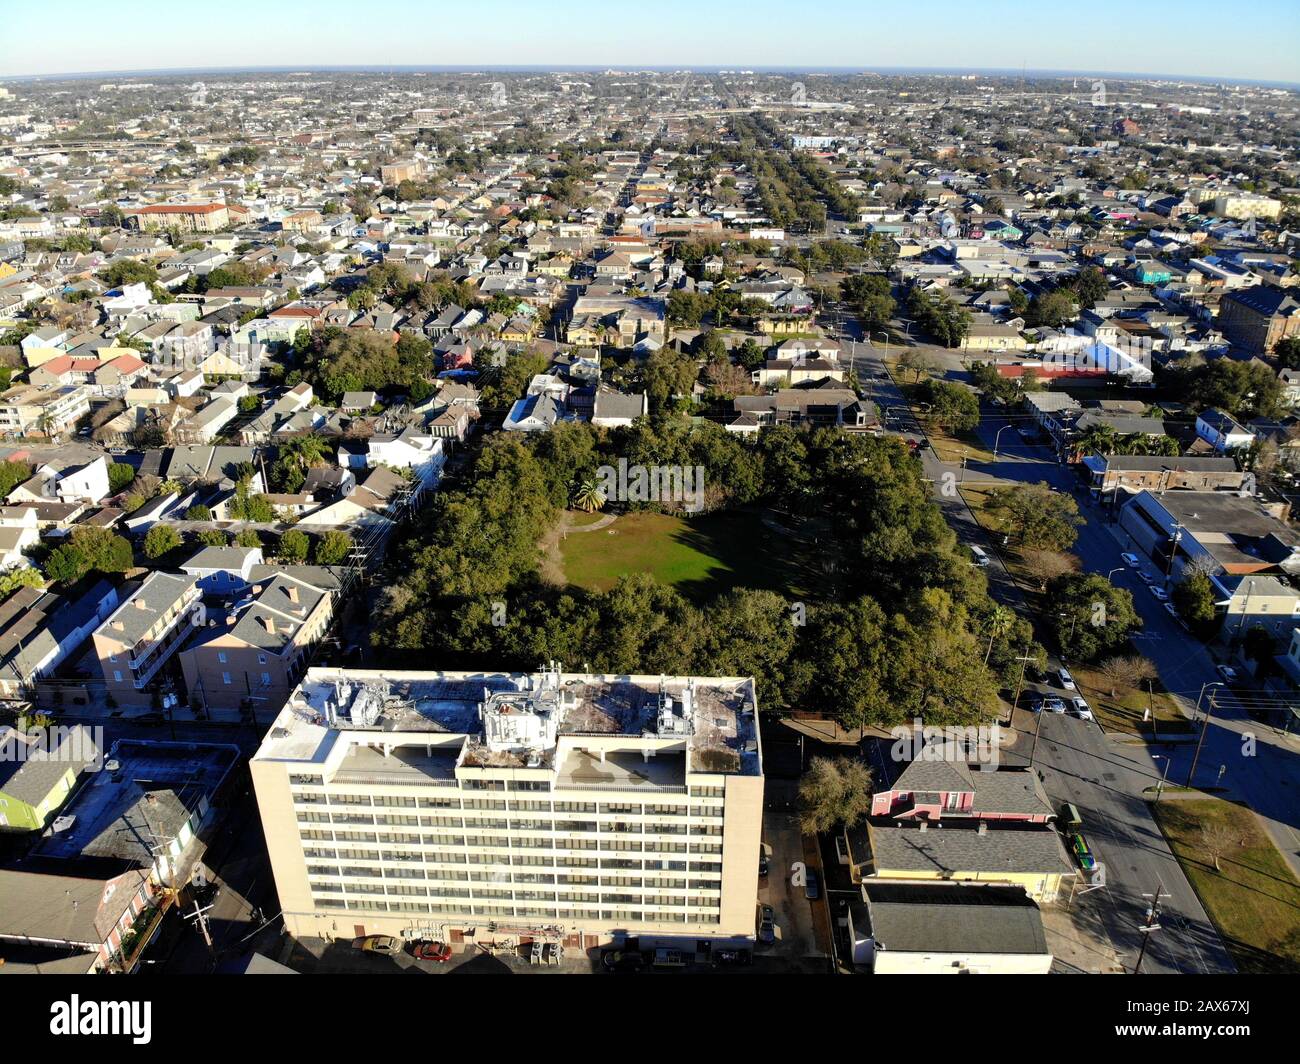 New Orleans, Louisiana, U.S.A - February 7, 2020 - The aerial view of the residential areas, park and buildings on French Quarter Stock Photo